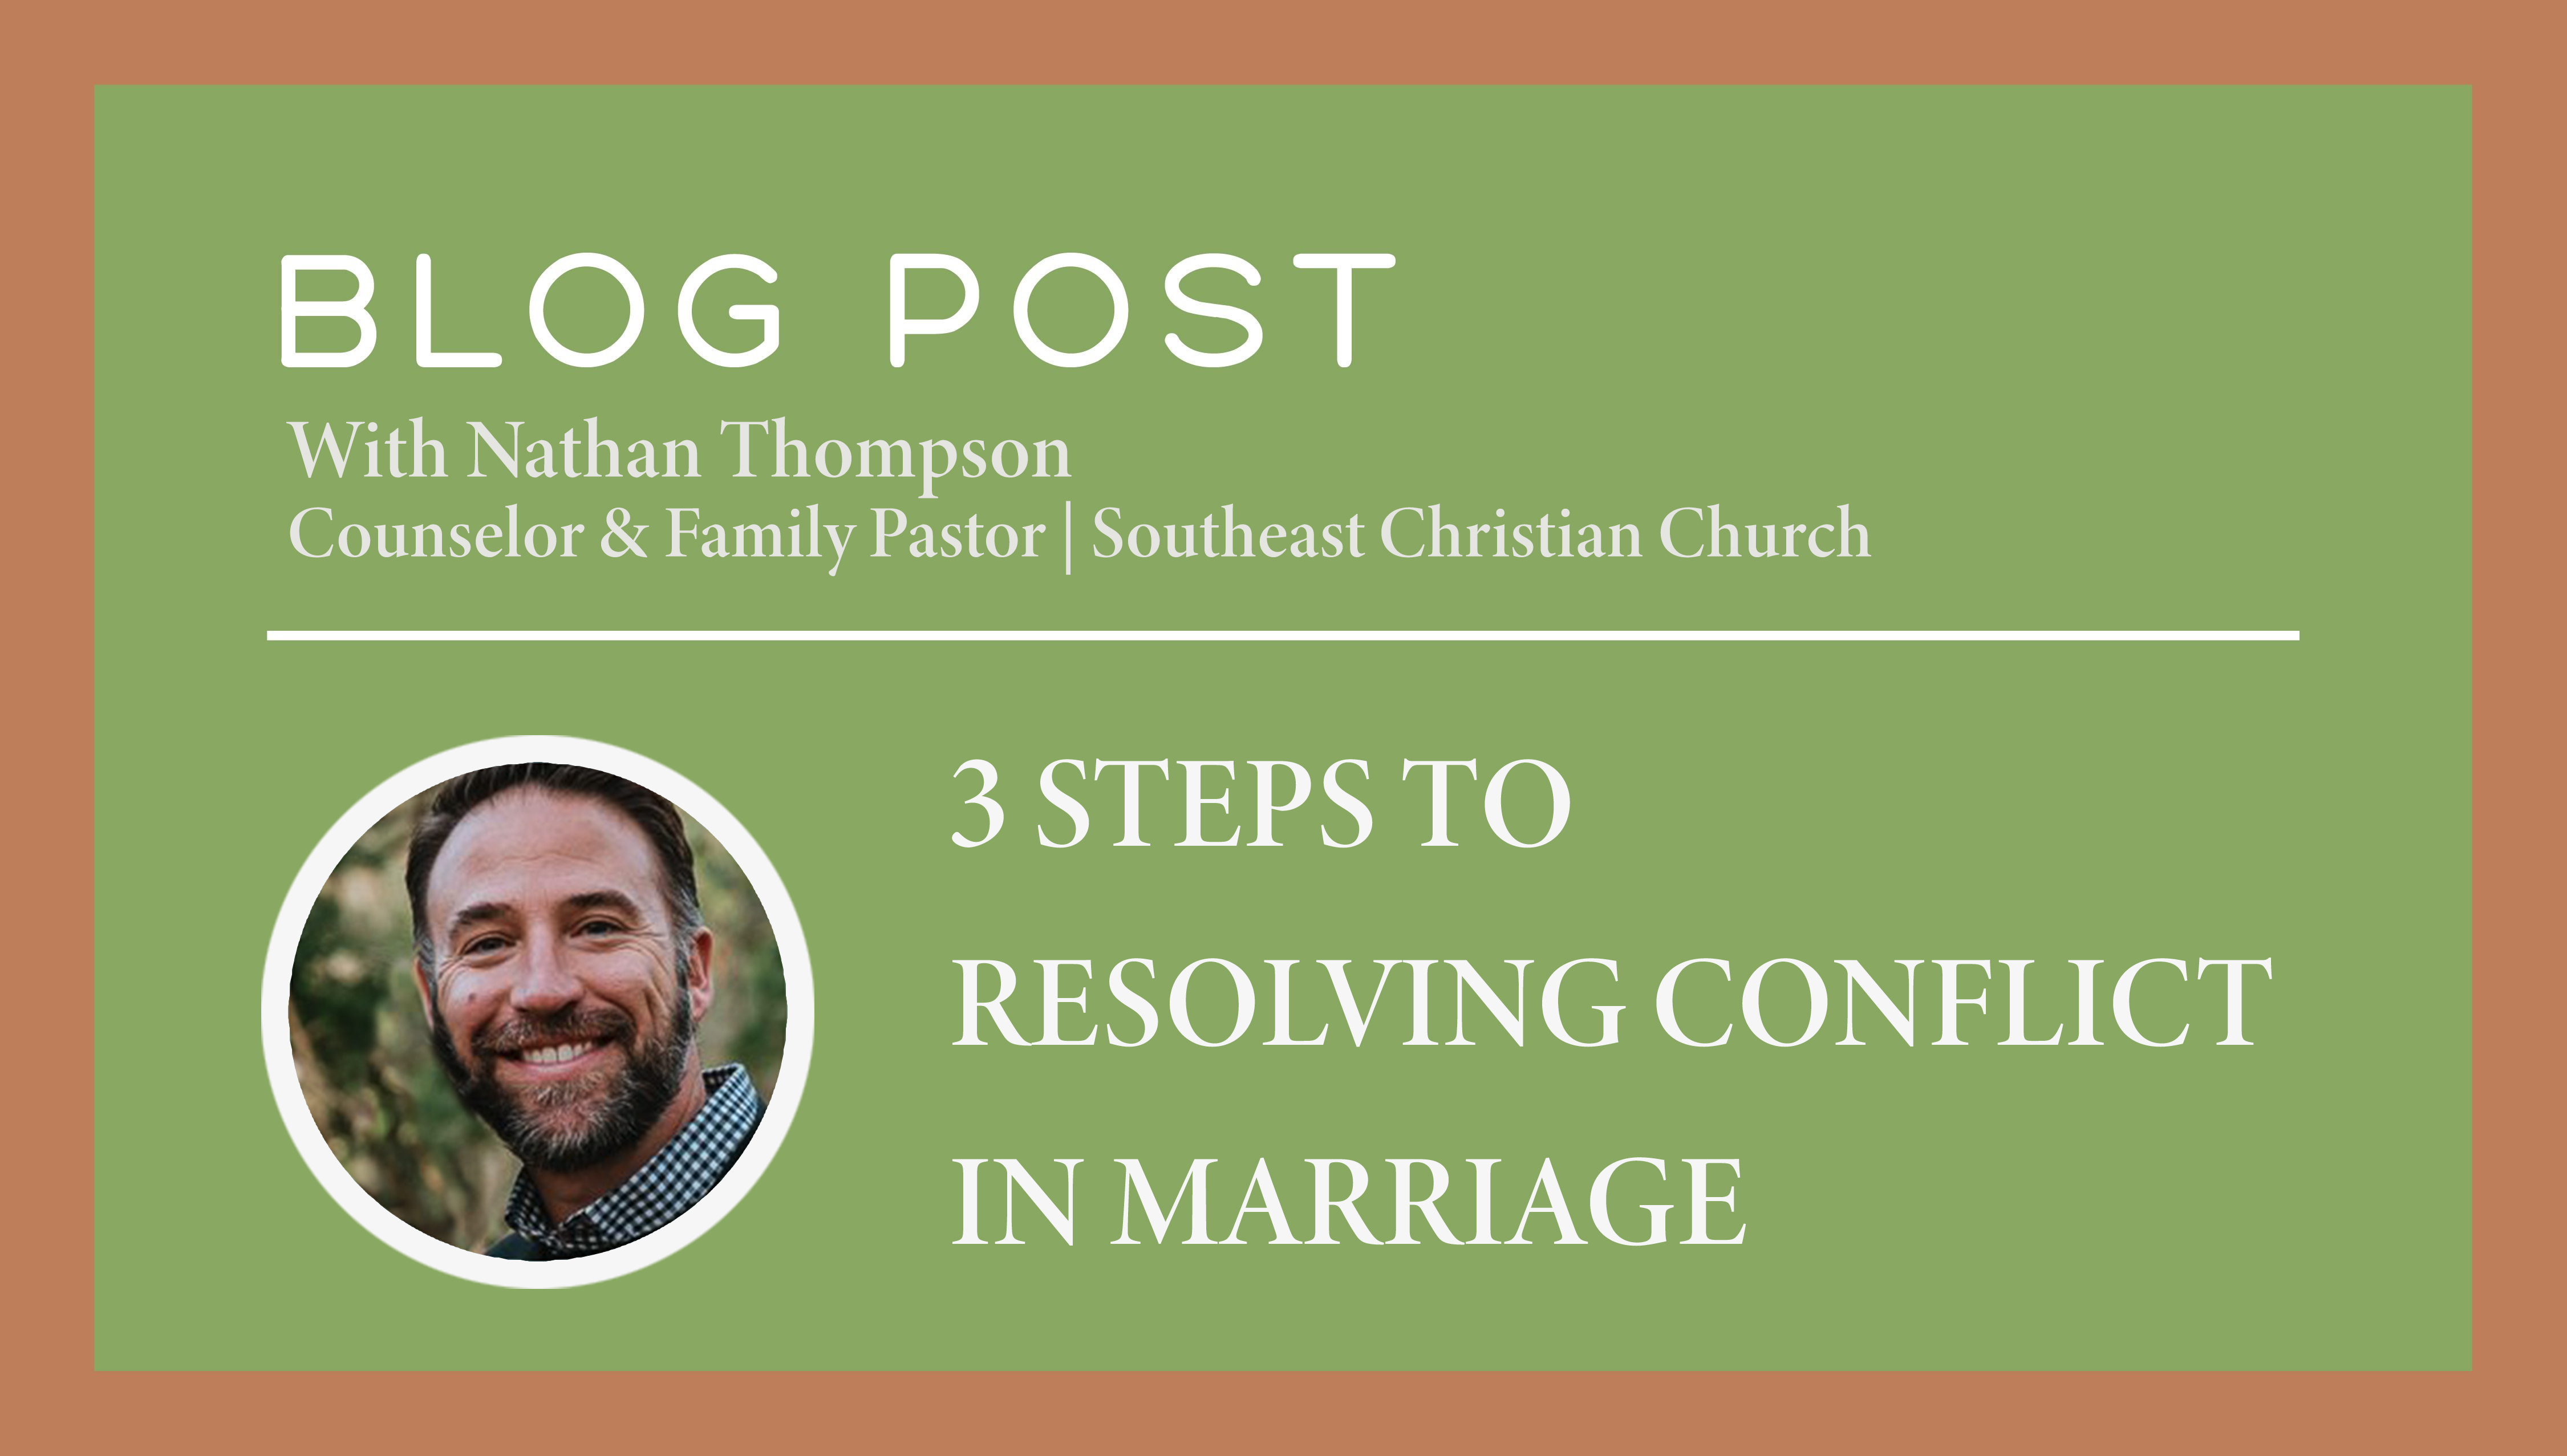 3 Steps to Resolving Conflict in Marriage